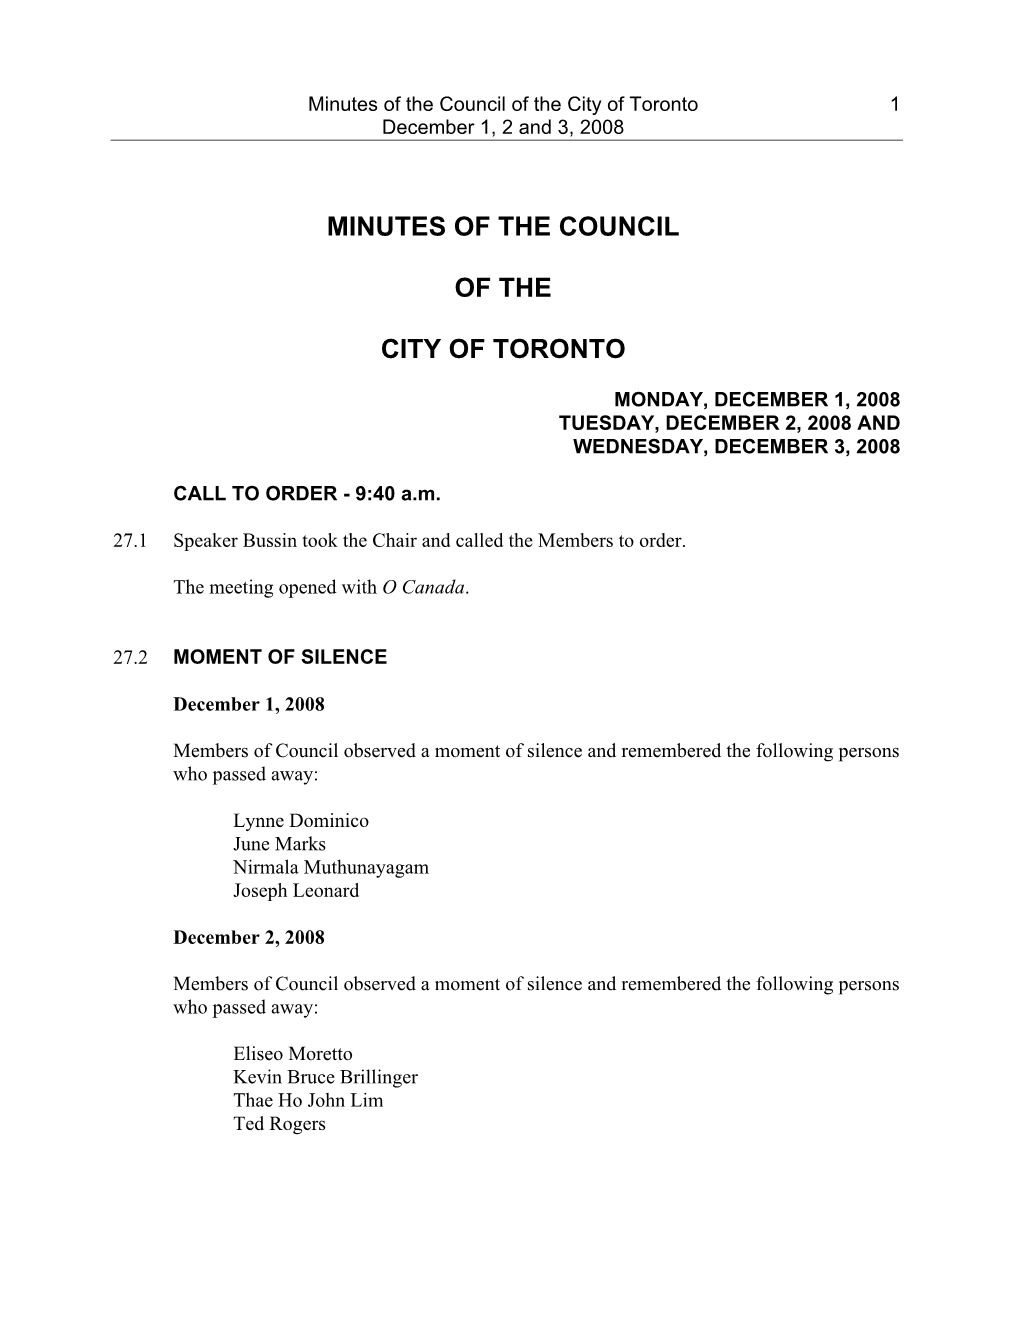 Minutes of the Council of the City of Toronto 1 December 1, 2 and 3, 2008